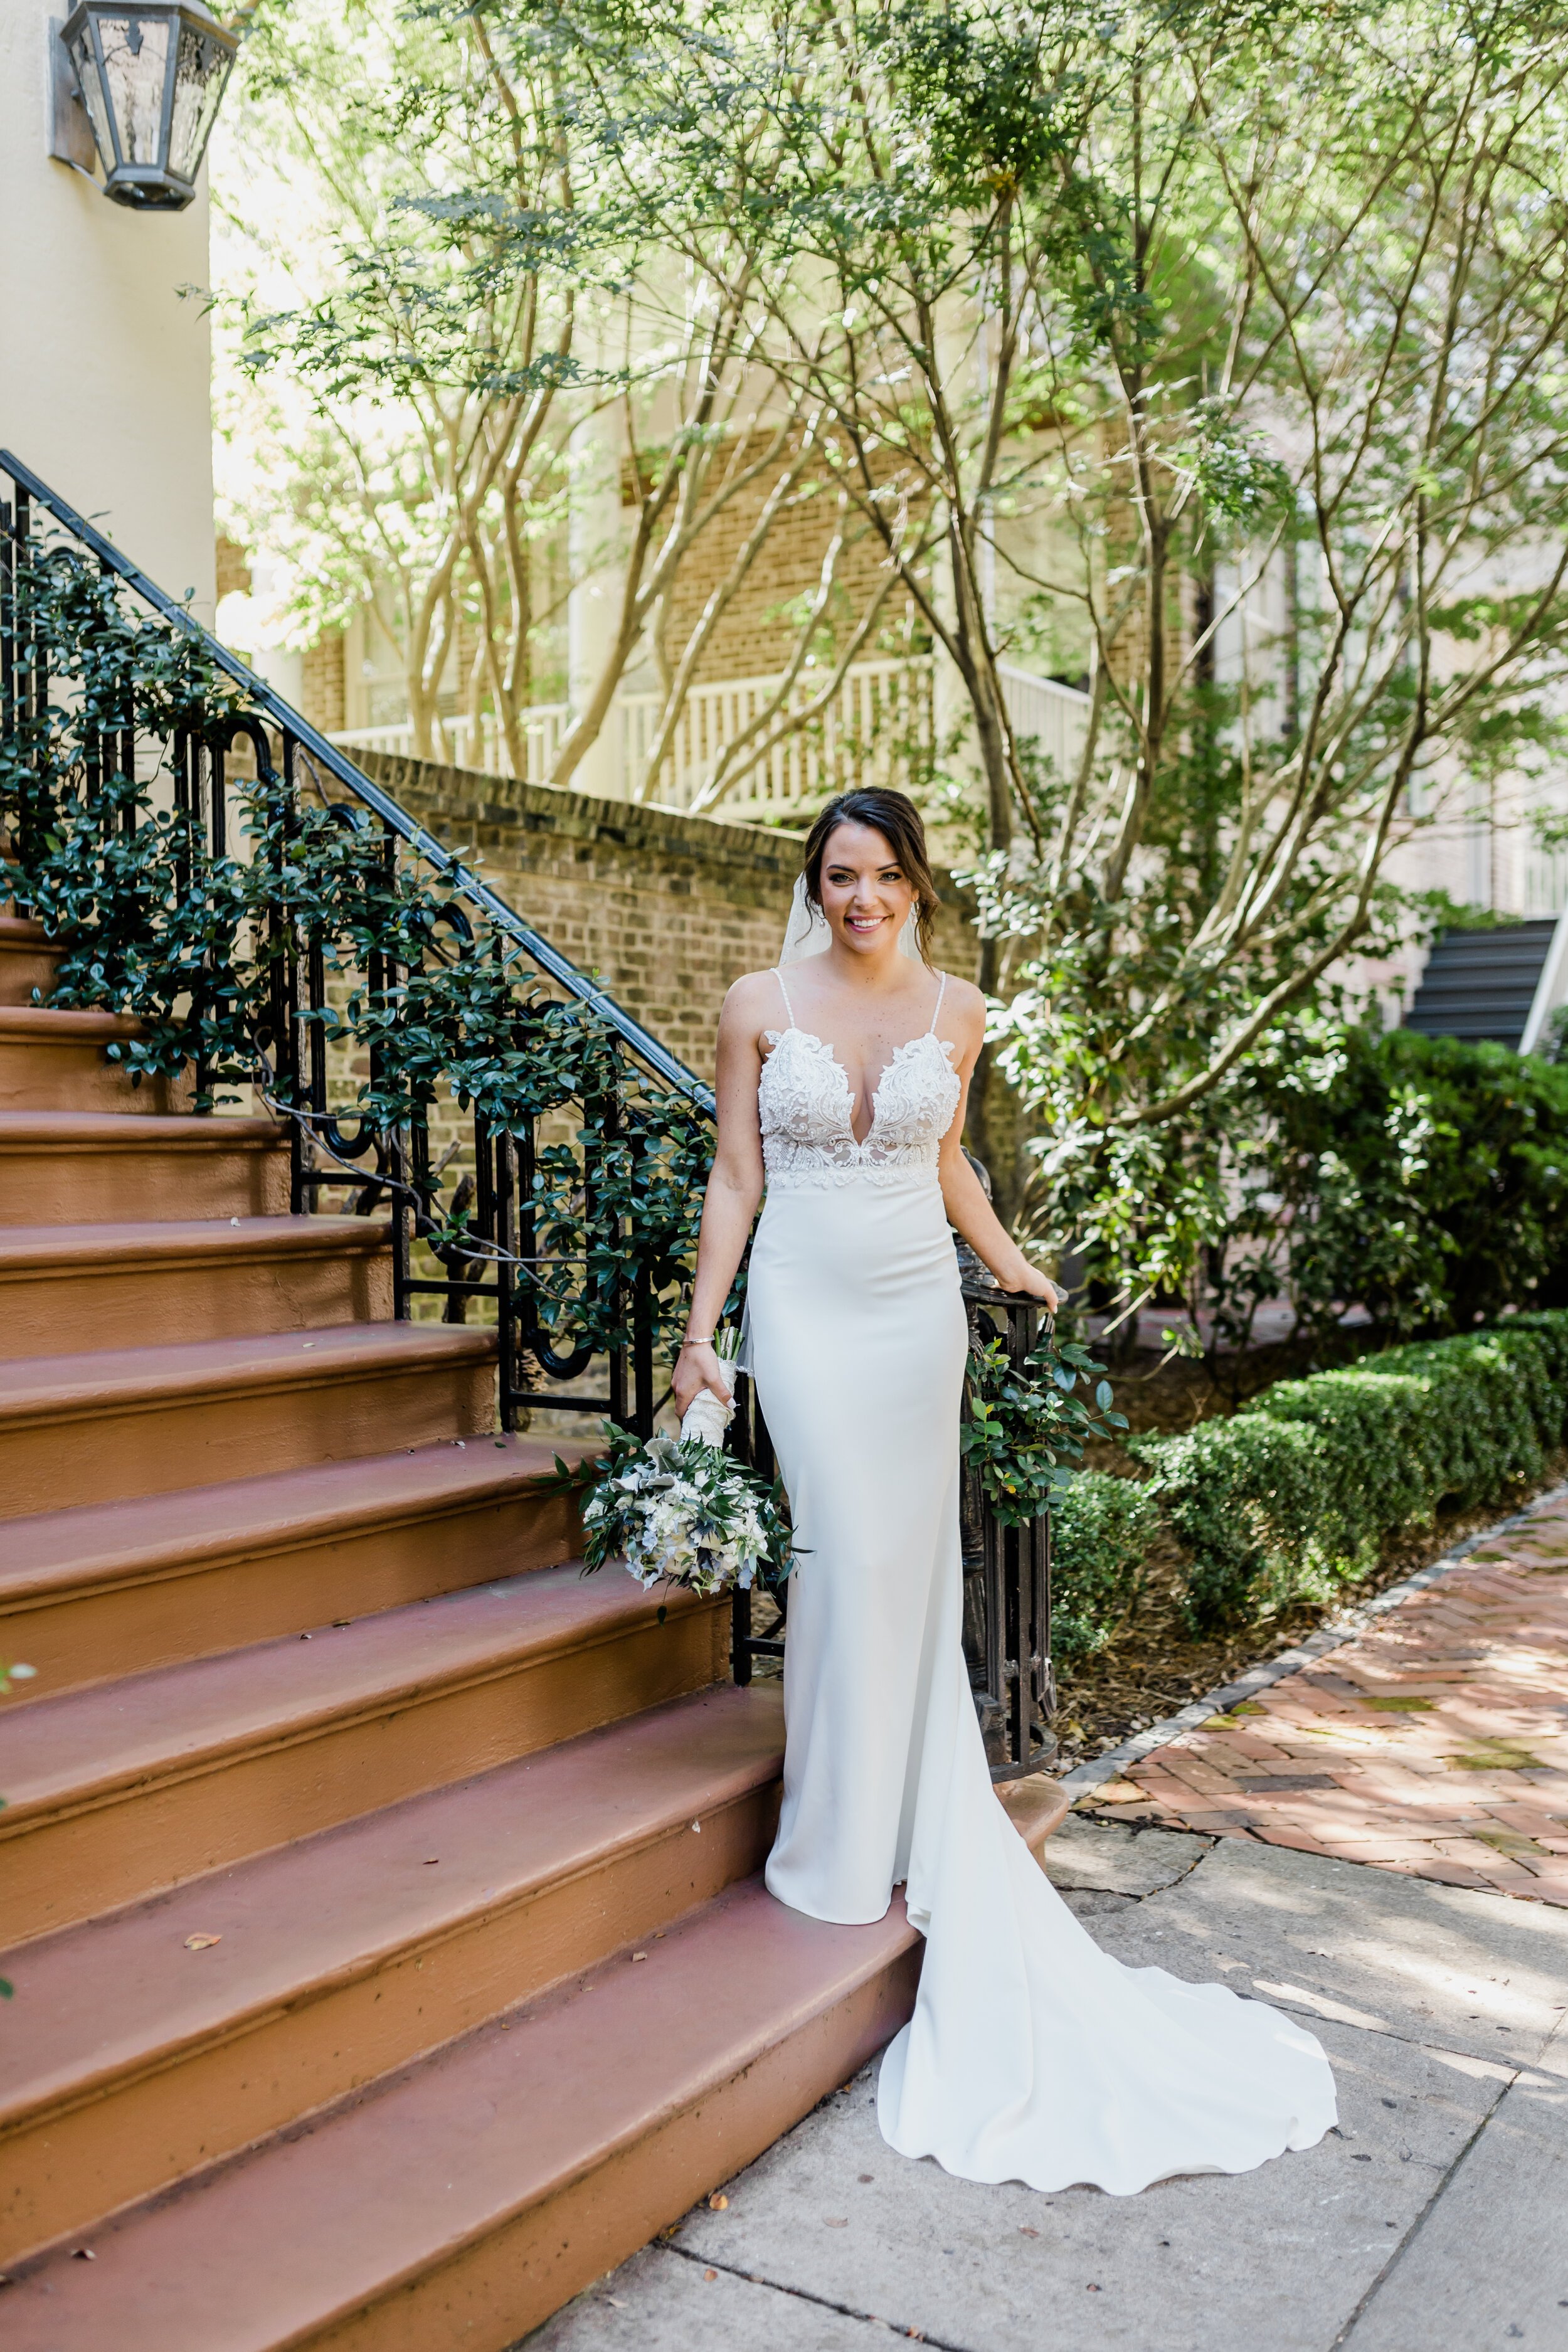 ivory-and-beau-bride-rosemary-wedding-dress-made-with-love-bridal-bridal-gown-wedding-gown-real-bride-wedding-blog-bridal-blog-bridal-shop-savannah-georgia-bridal-boutique-Portrait-81.jpg